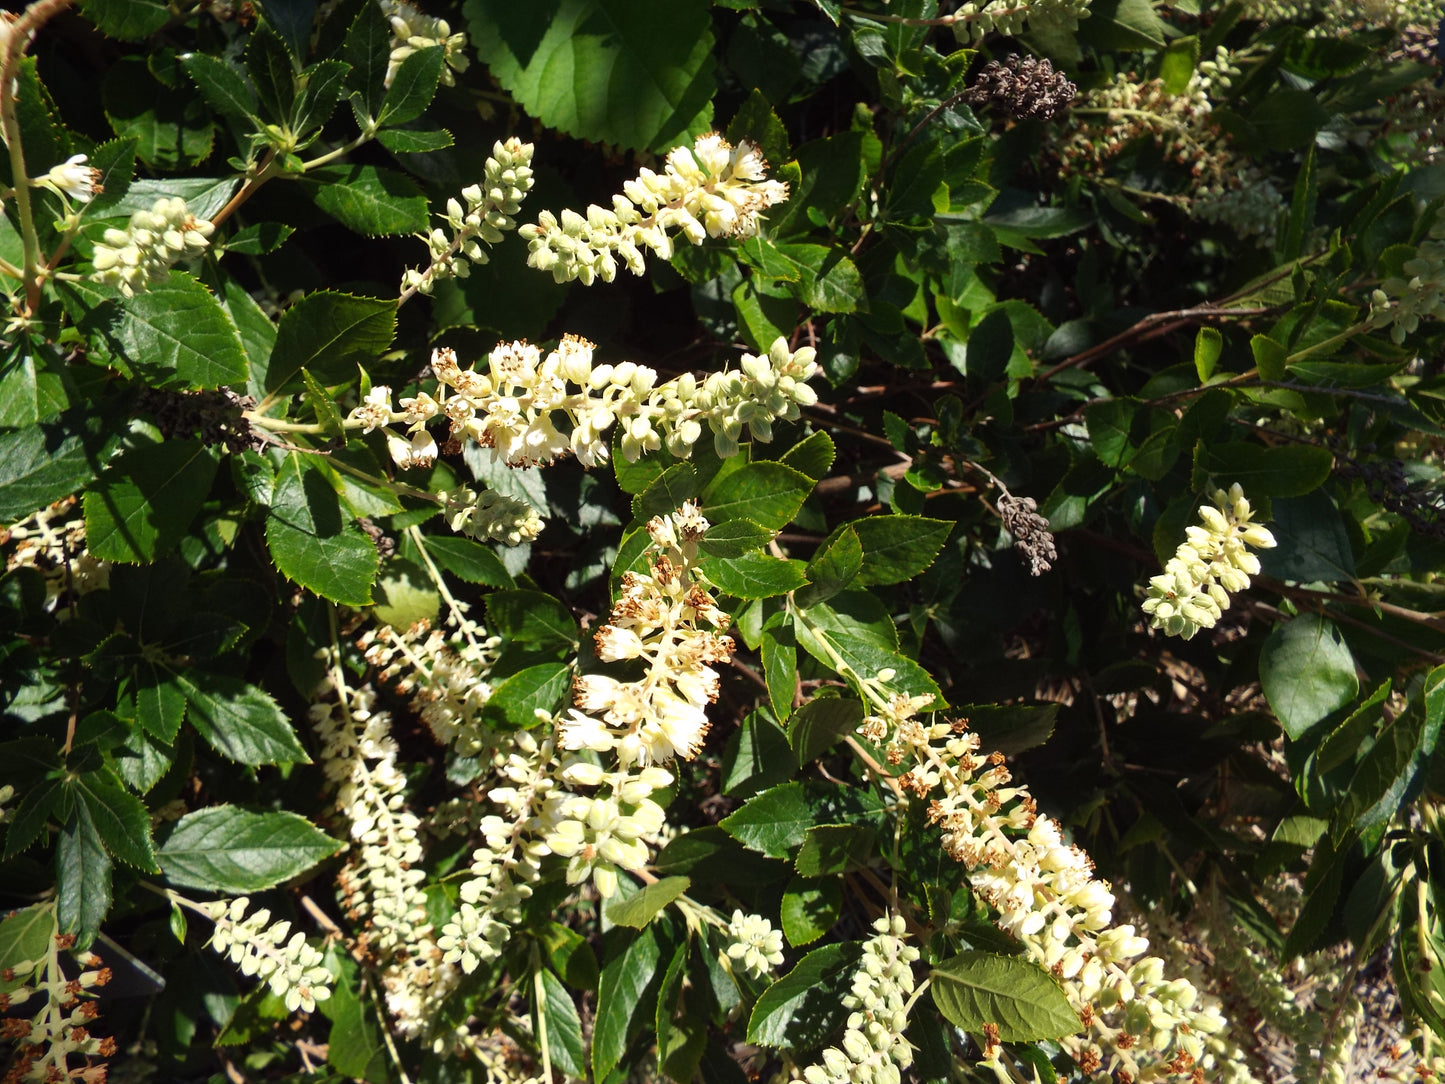 Wooly Wooly Summer-sweet (Clethra tomentosa)